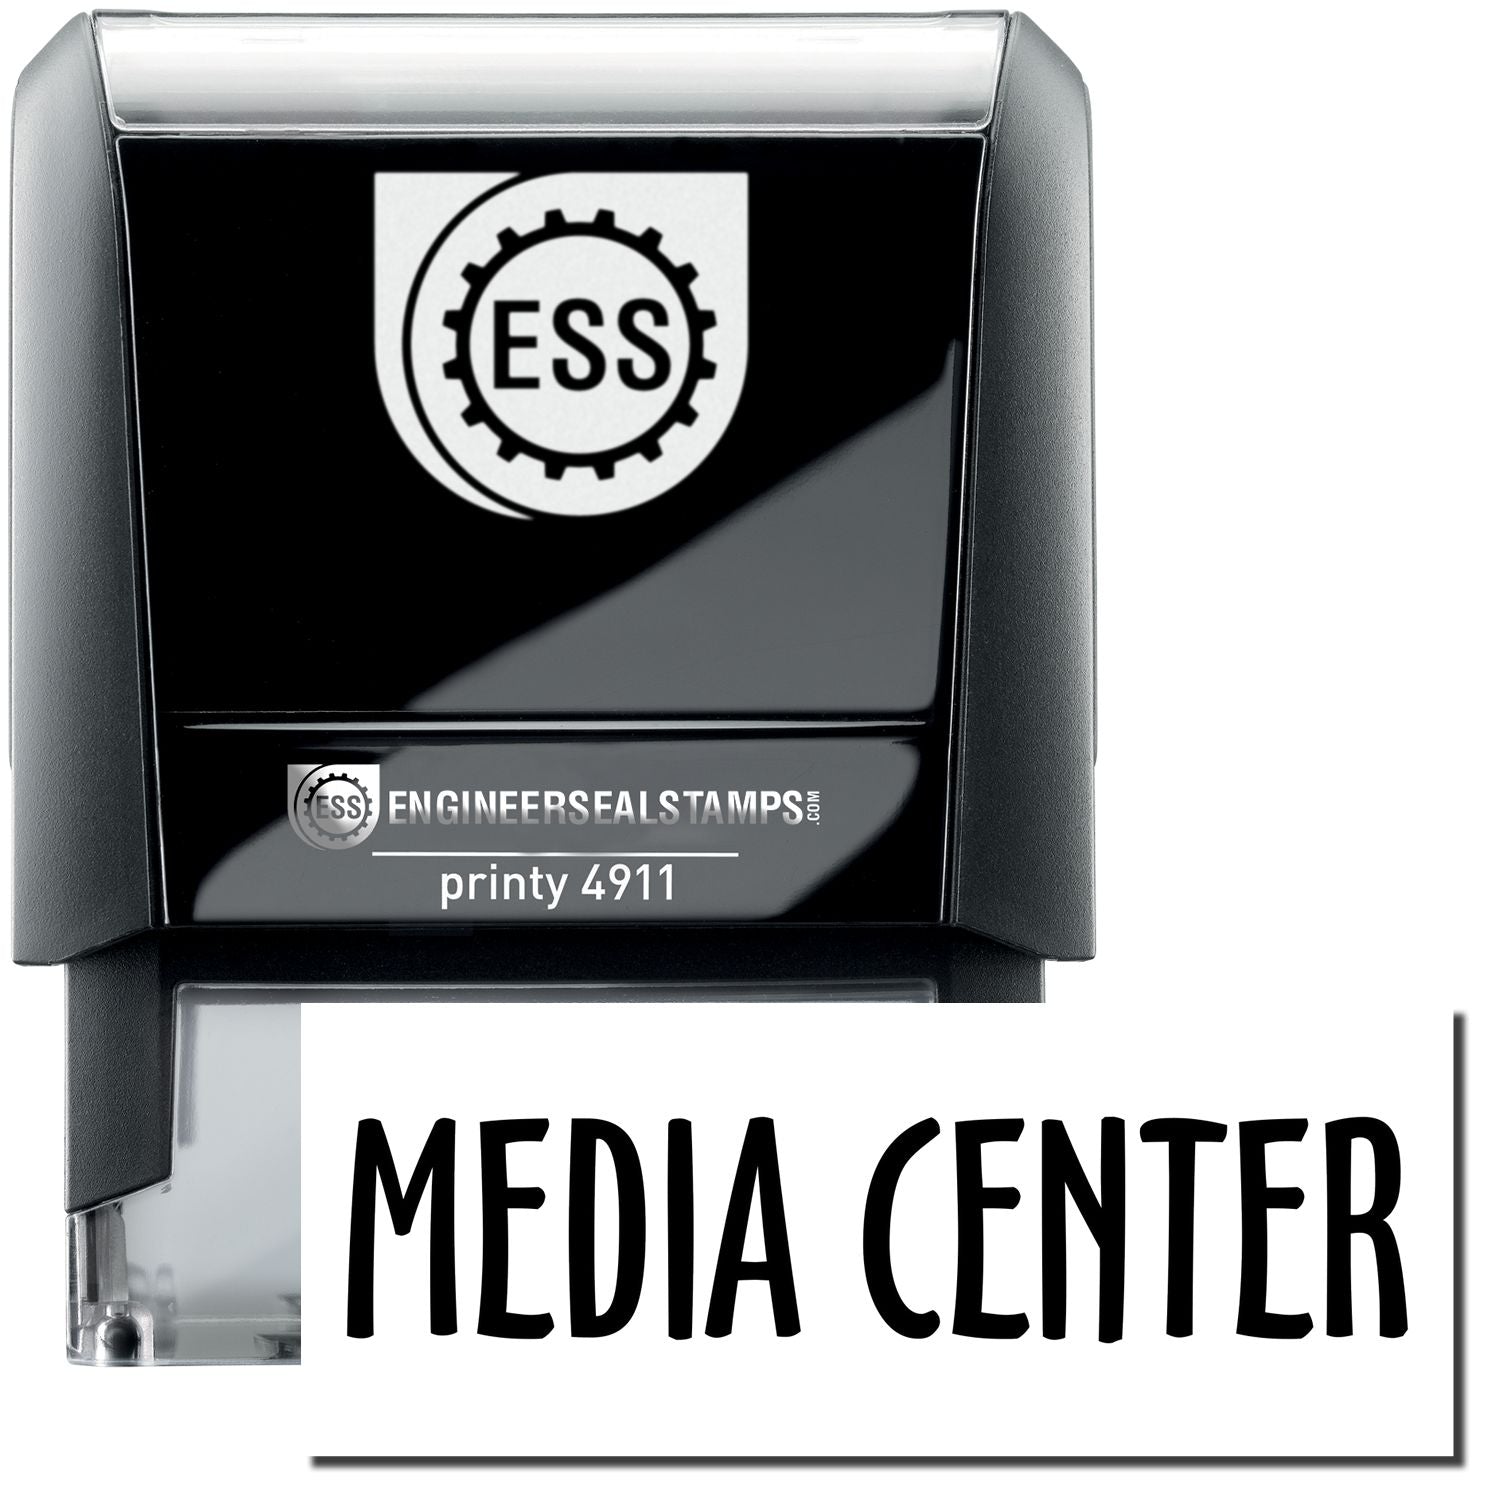 A self-inking stamp with a stamped image showing how the text "MEDIA CENTER" is displayed after stamping.